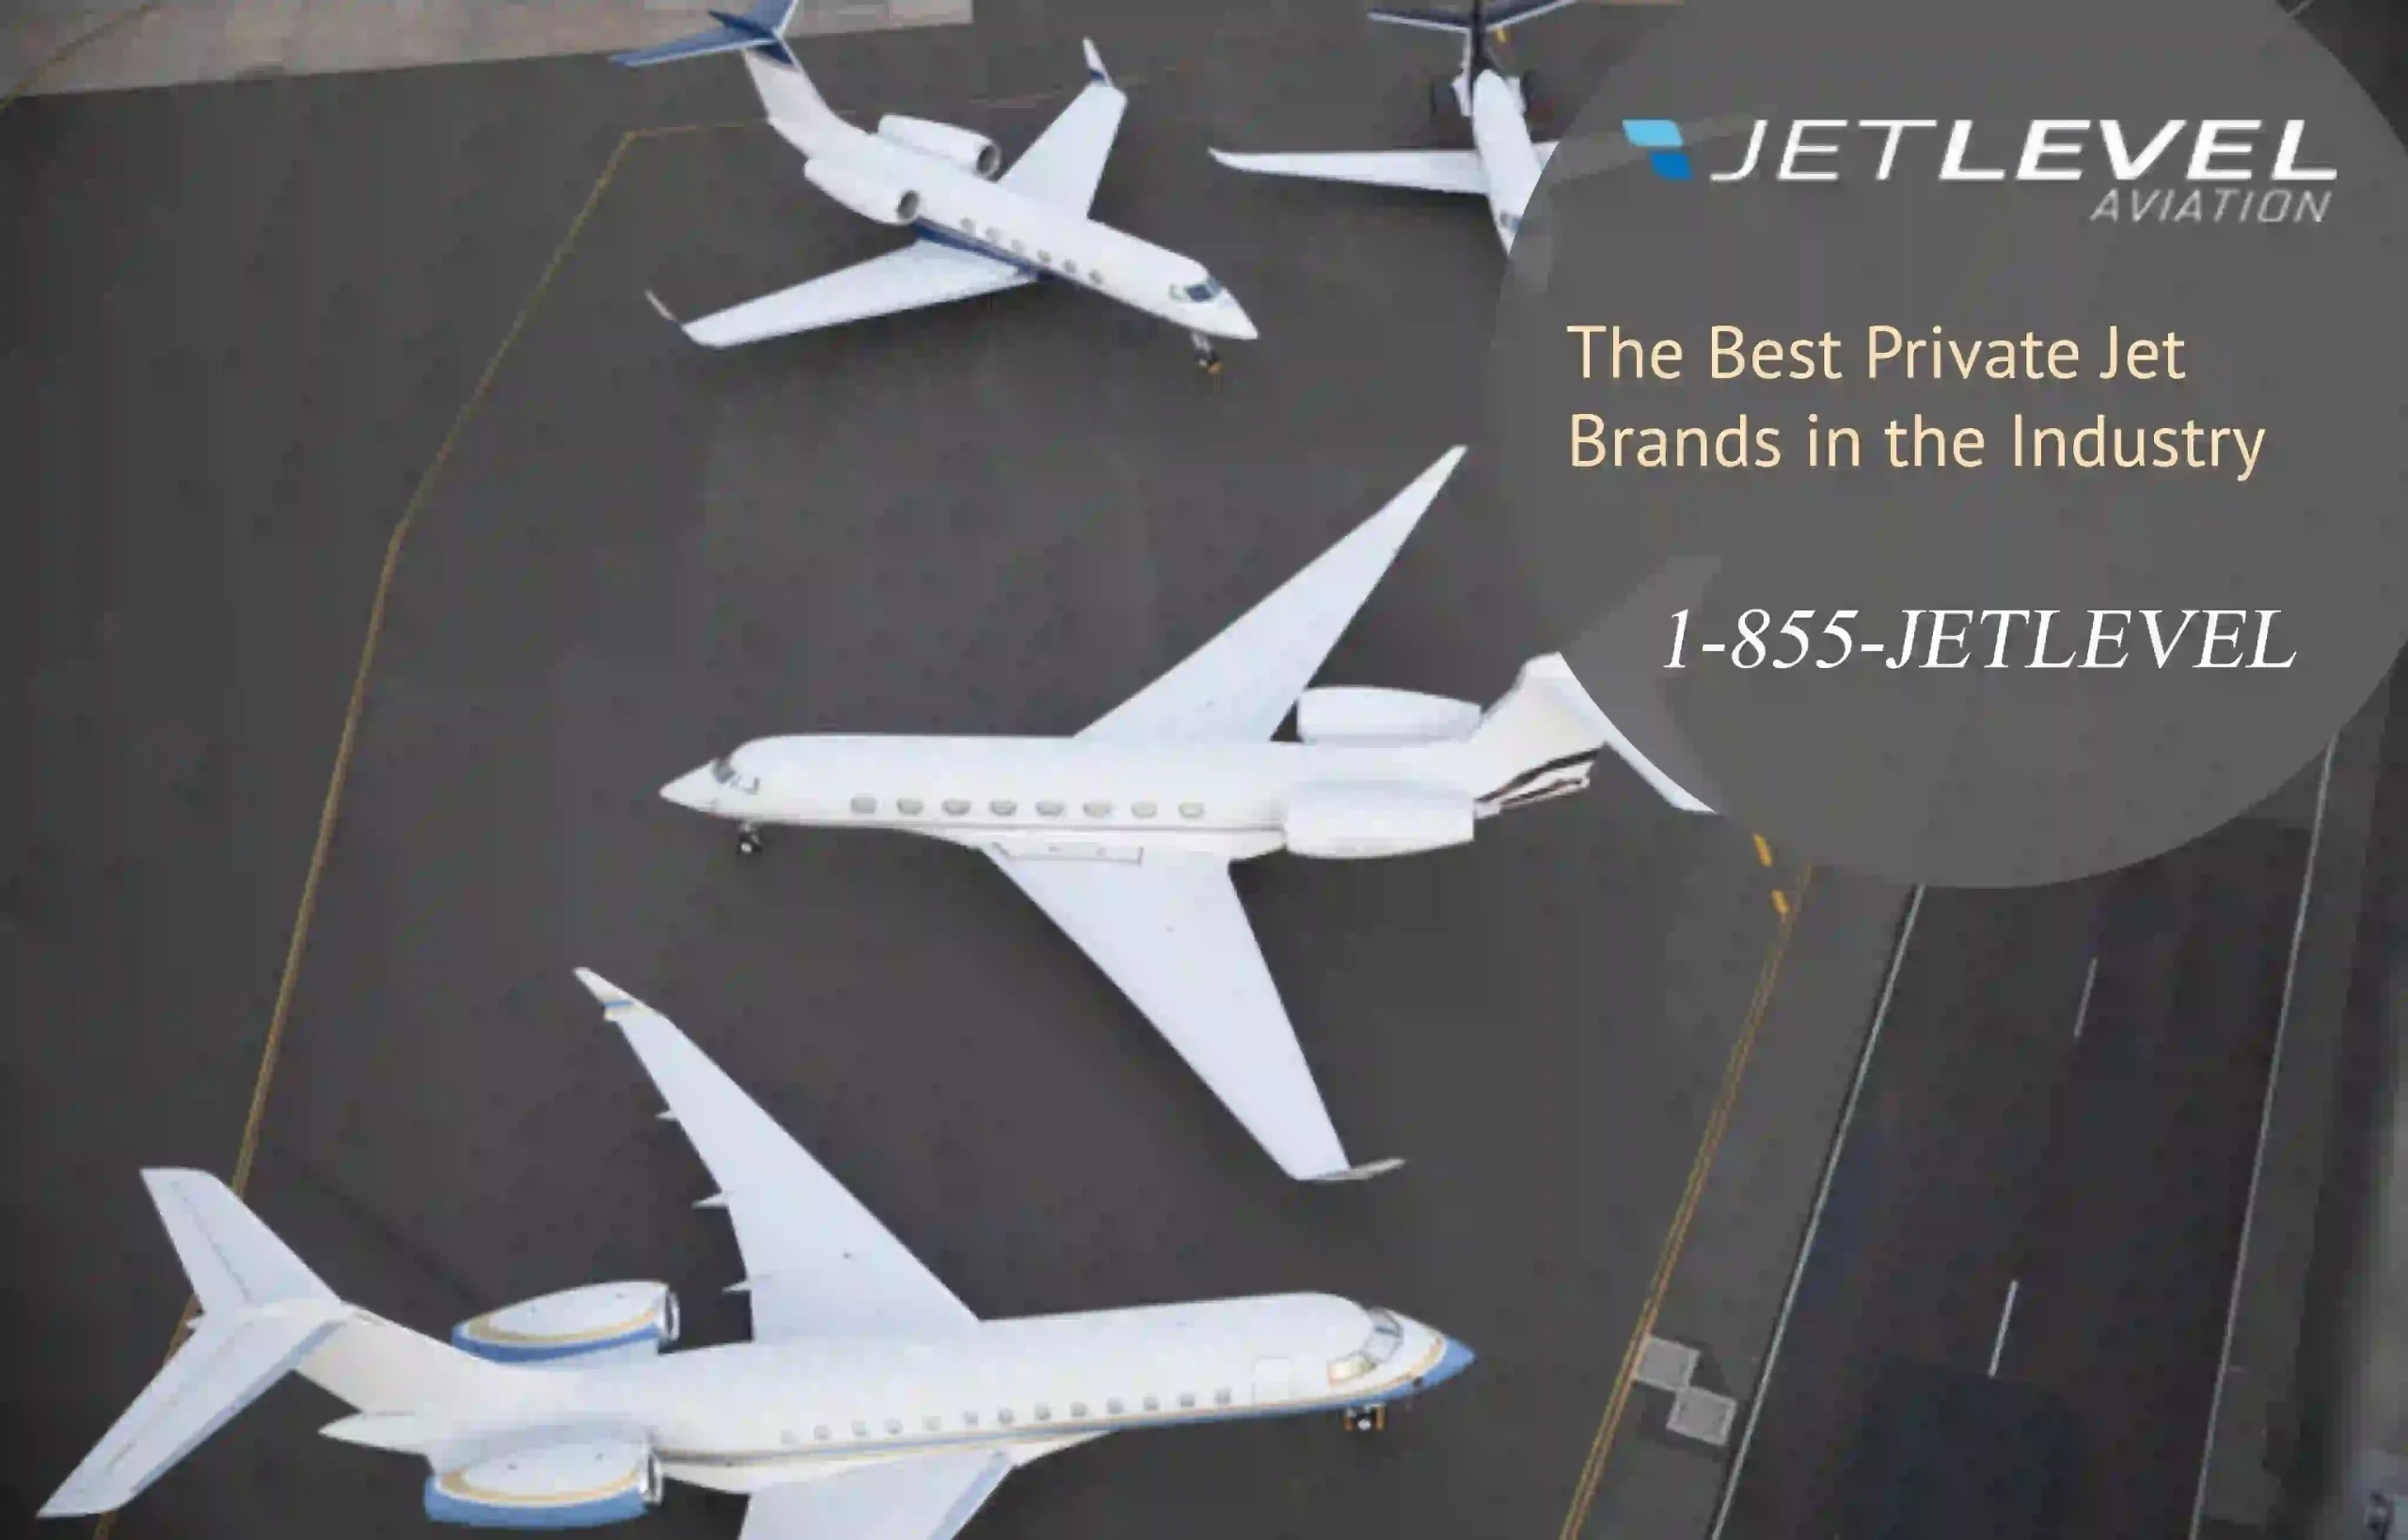 The Best Private Jet Brands in the Industry